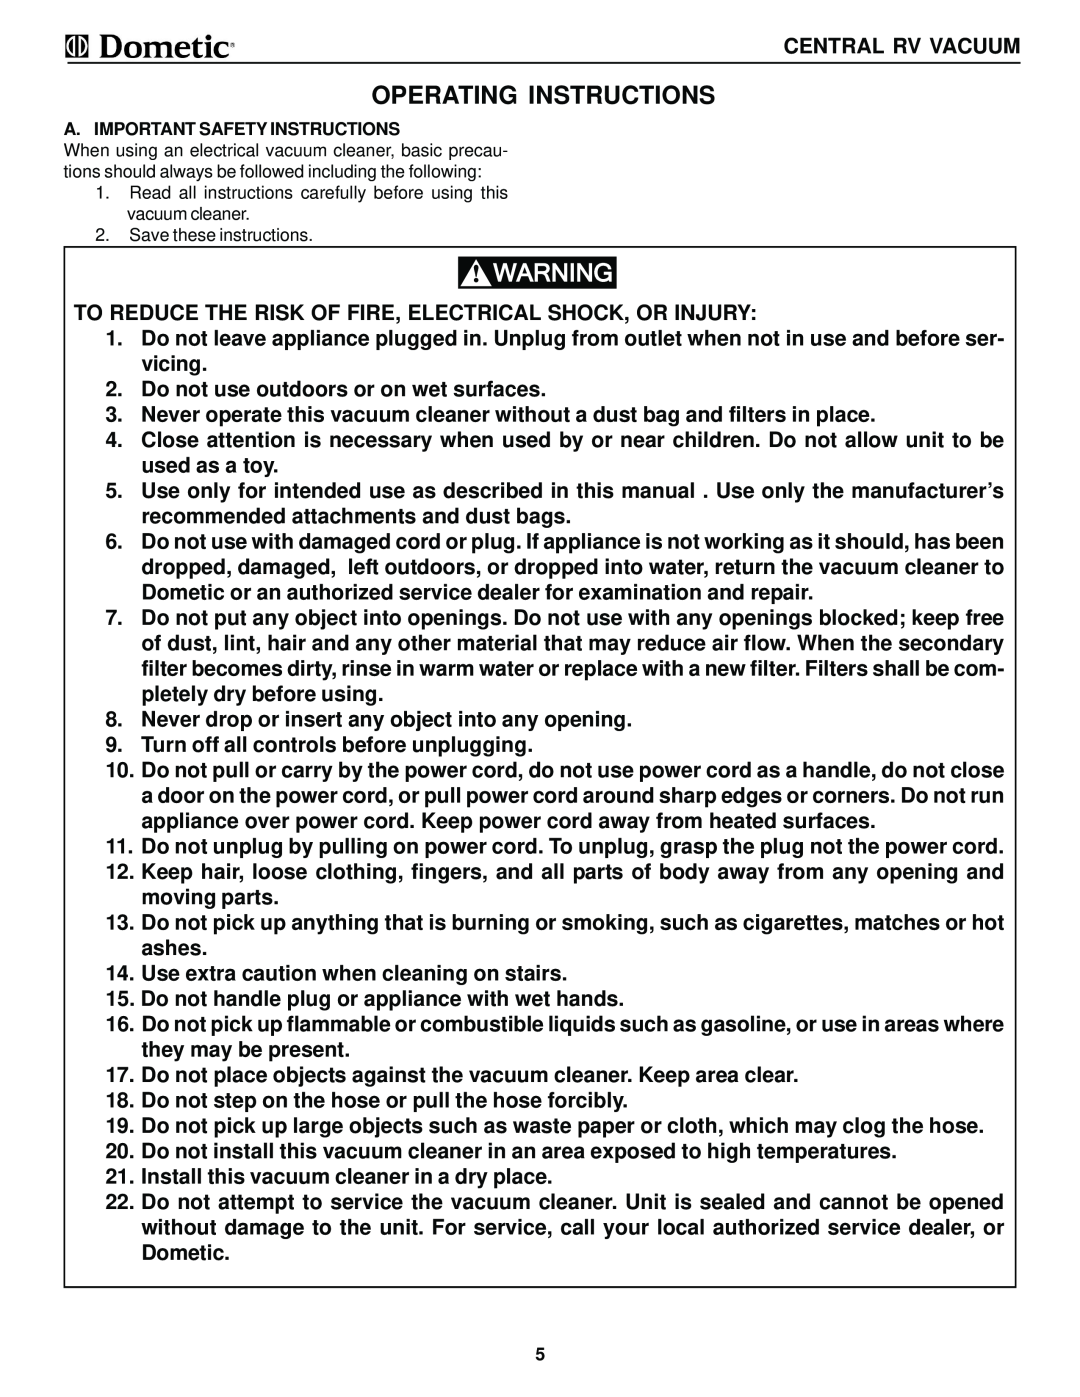 Dometic 9093100-(X)PR, 9093200-(X)PR manual Operating Instructions, A. Important Safety Instructions 